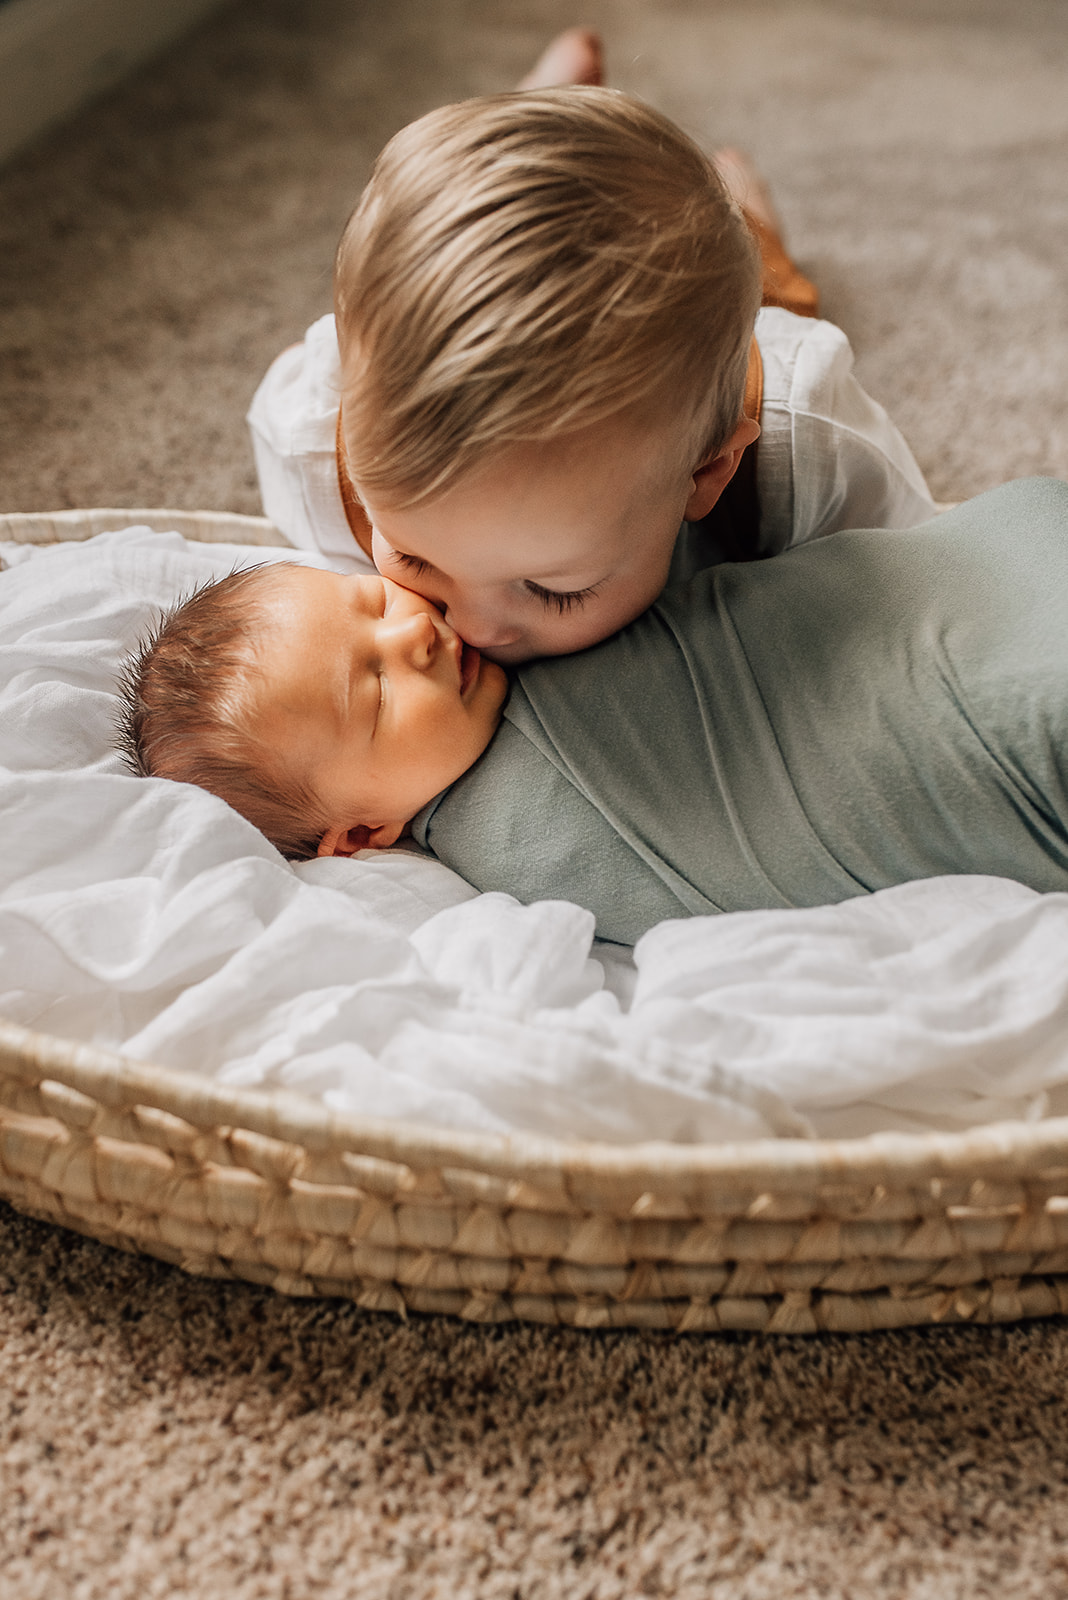 A young boy kisses the cheek of his newborn baby sibling while it sleeps in a basket Cy Fair Birth Center